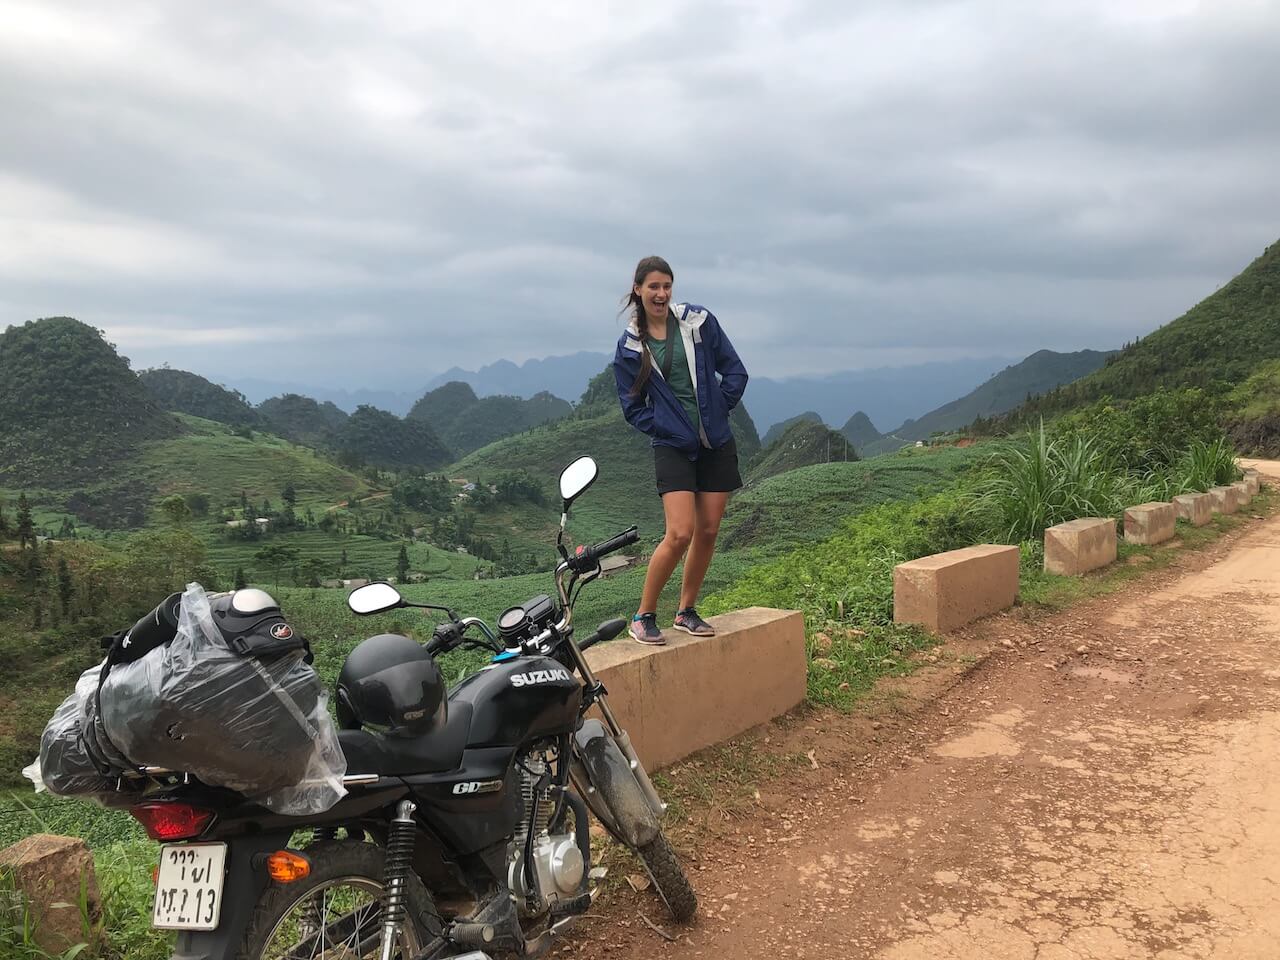 The convenience of travel in Vietnam